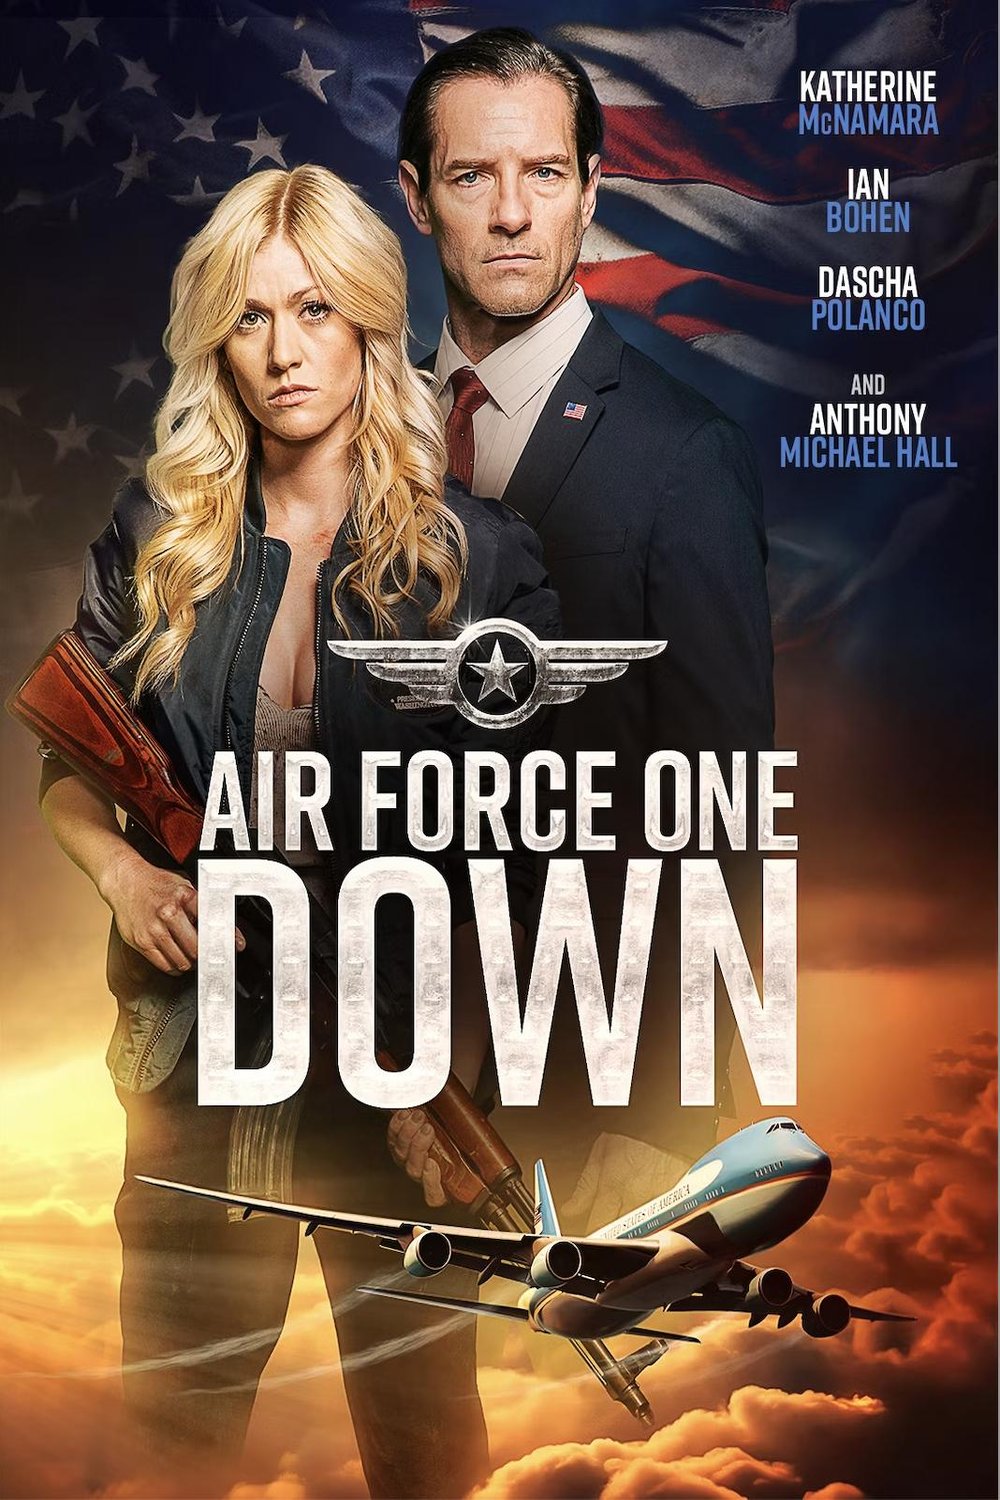 Poster of the movie Air Force One Down